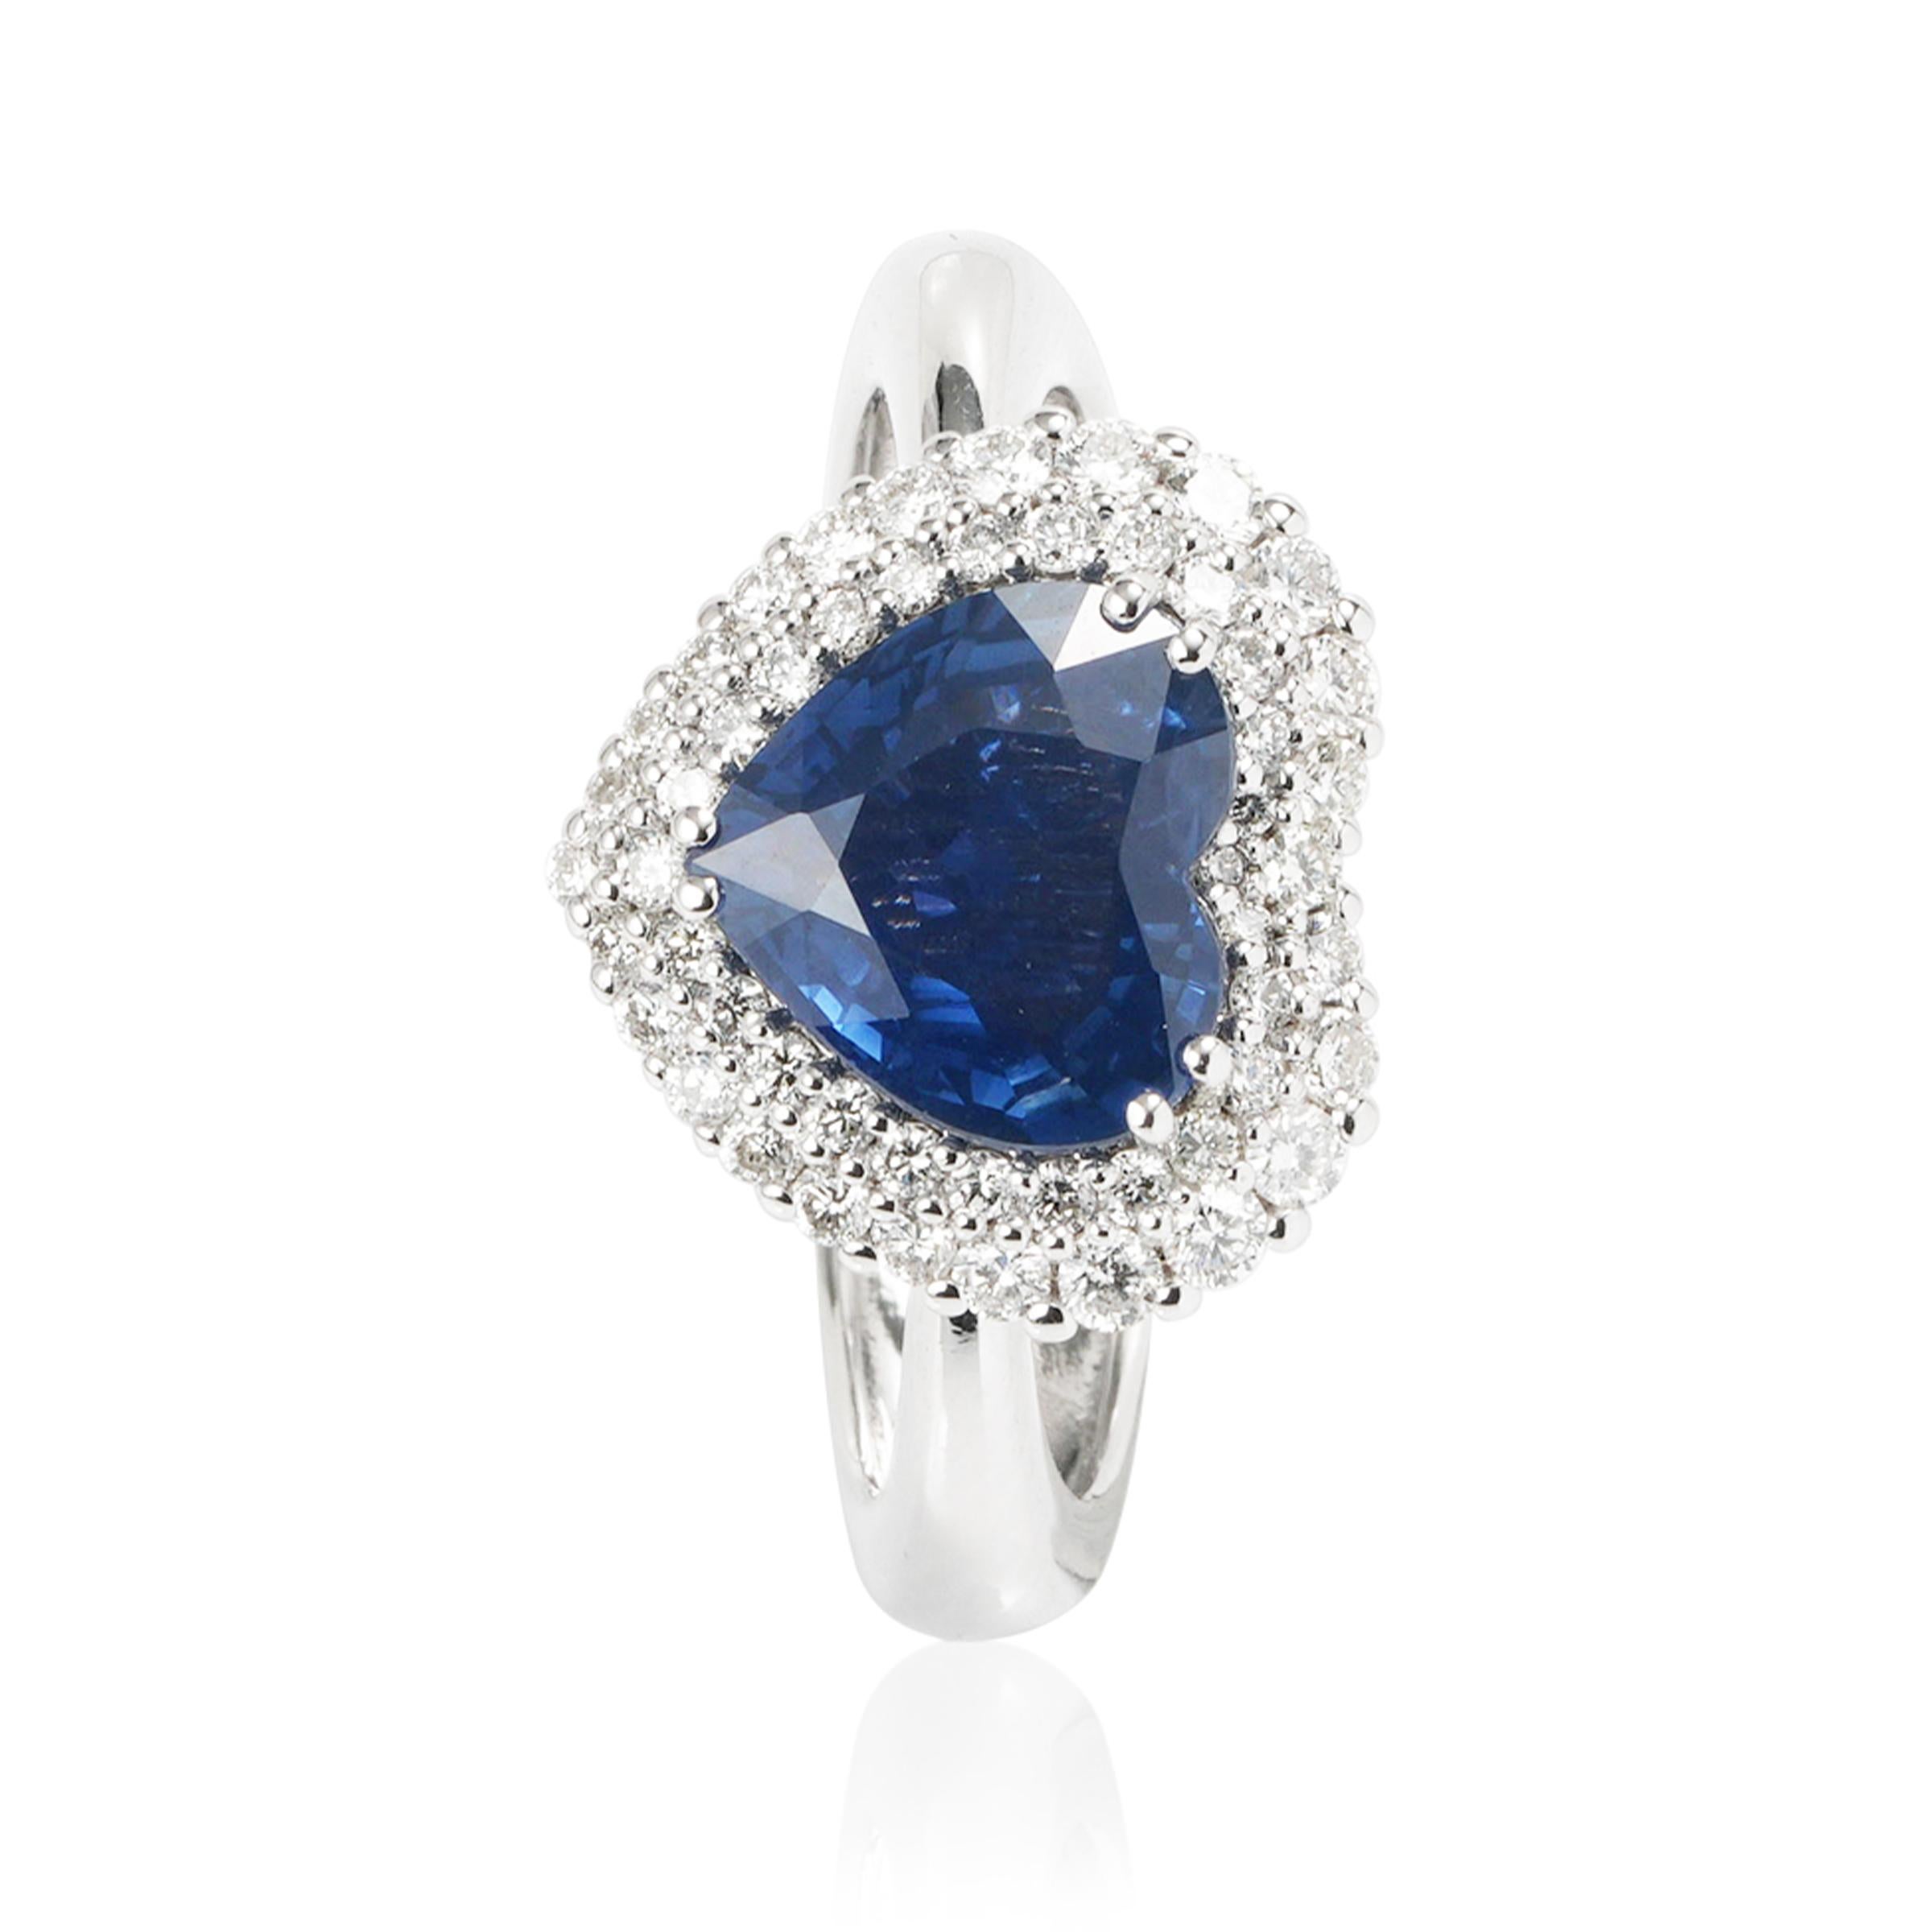 One a of a kind ring from the Essentials collection. Heart shaped sapphire with brilliants made in white gold 18k.
The stone comes with international certificate and the personalized warranty card by the brand. 
Sapphire: 2,05ct.
Diamonds: 0,20ct.